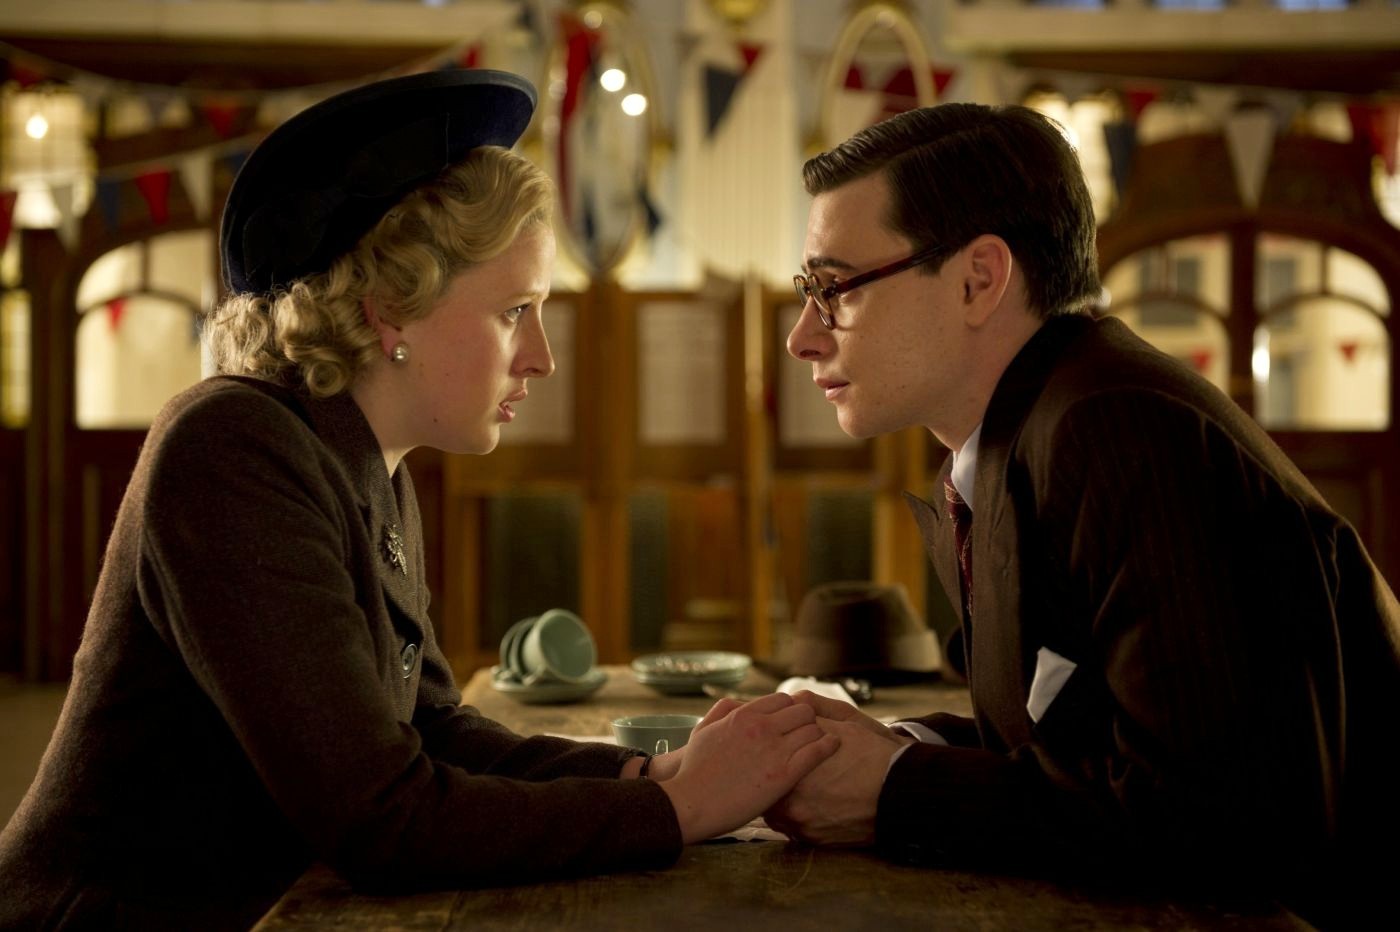 Alexandra Roach stars as Young Margaret Thatcher in and Harry Lloyd stars as Young Denis Thatcher  The Weinstein Company's The Iron Lady (2012)